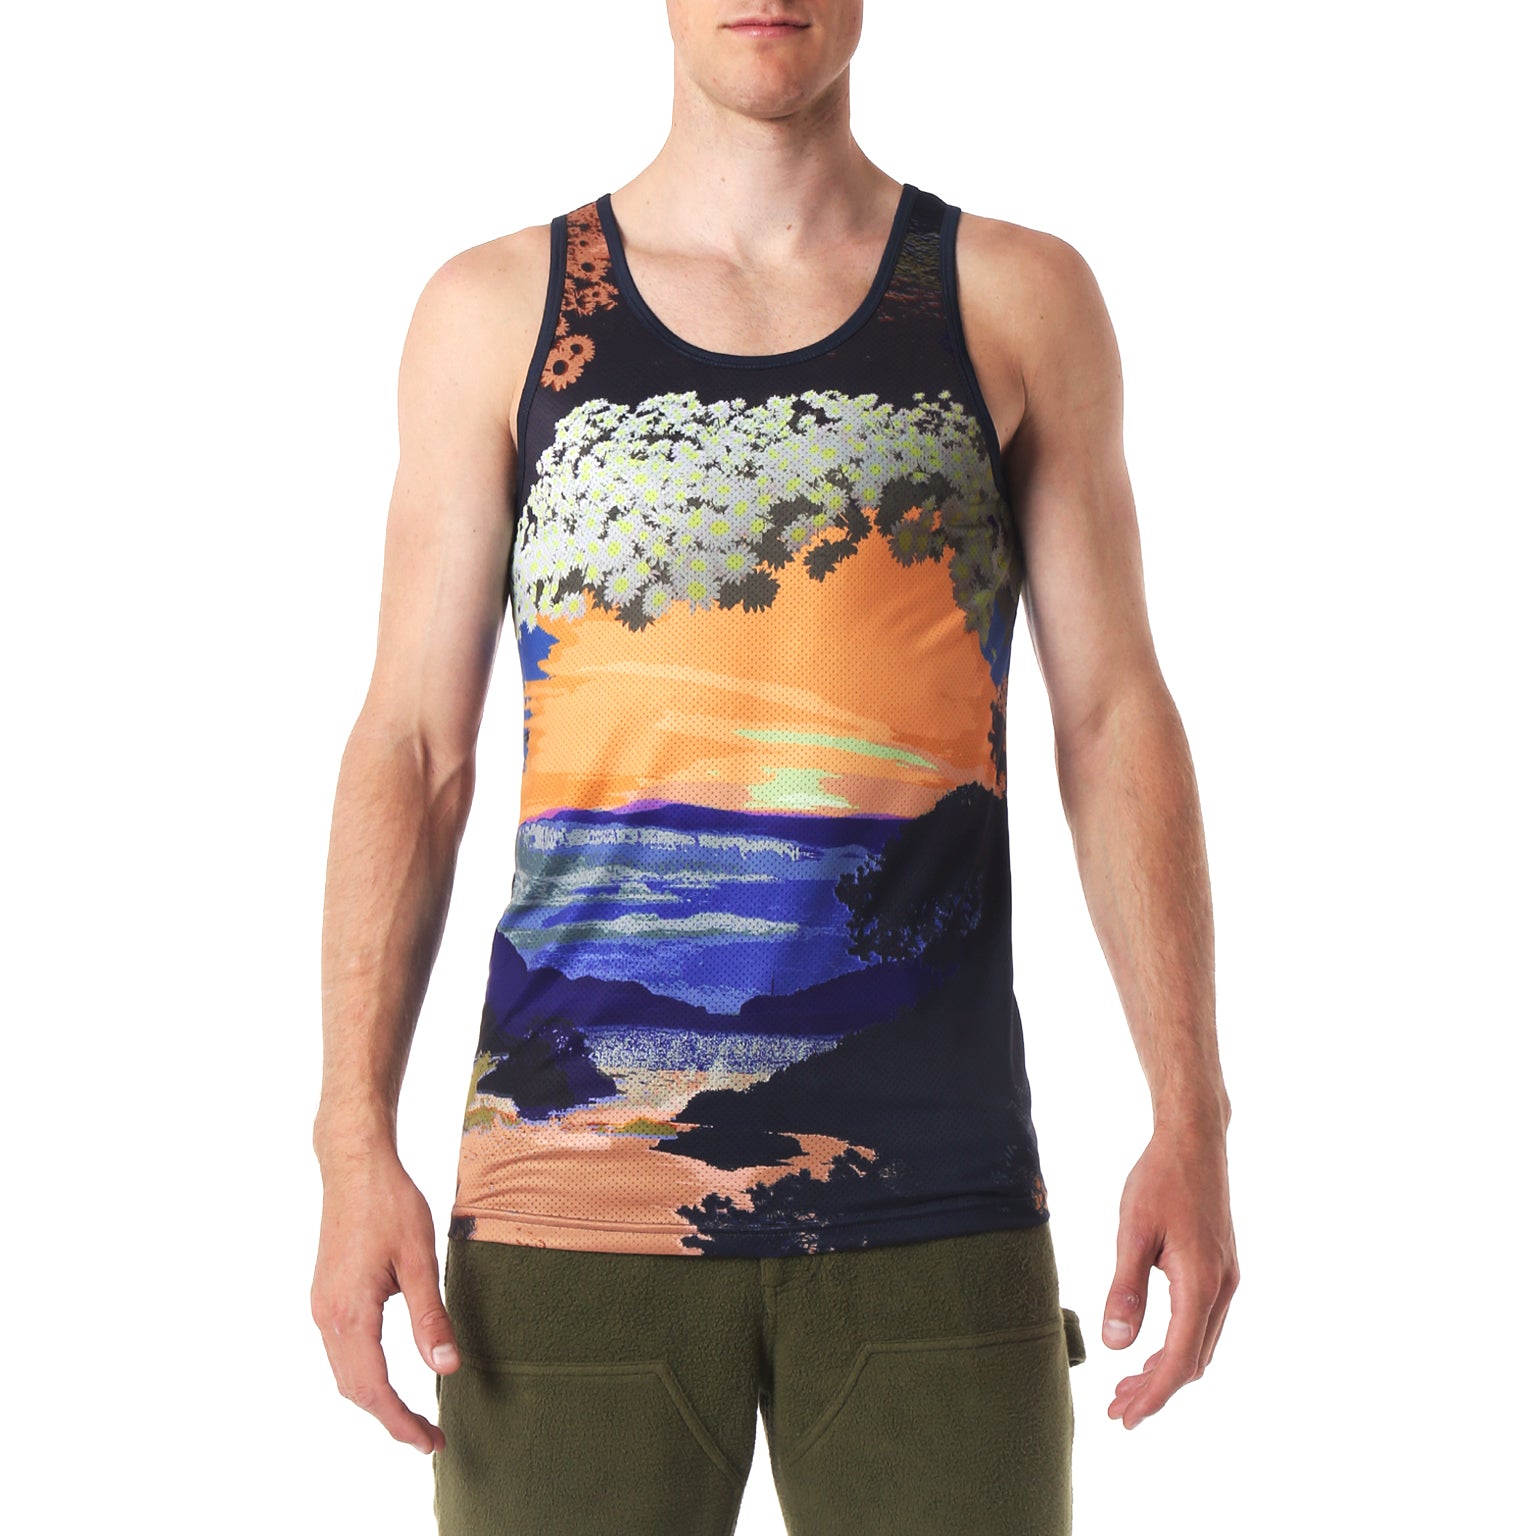 SAVE 70%- Happy Valley Sunset Printed Mesh Tank Top